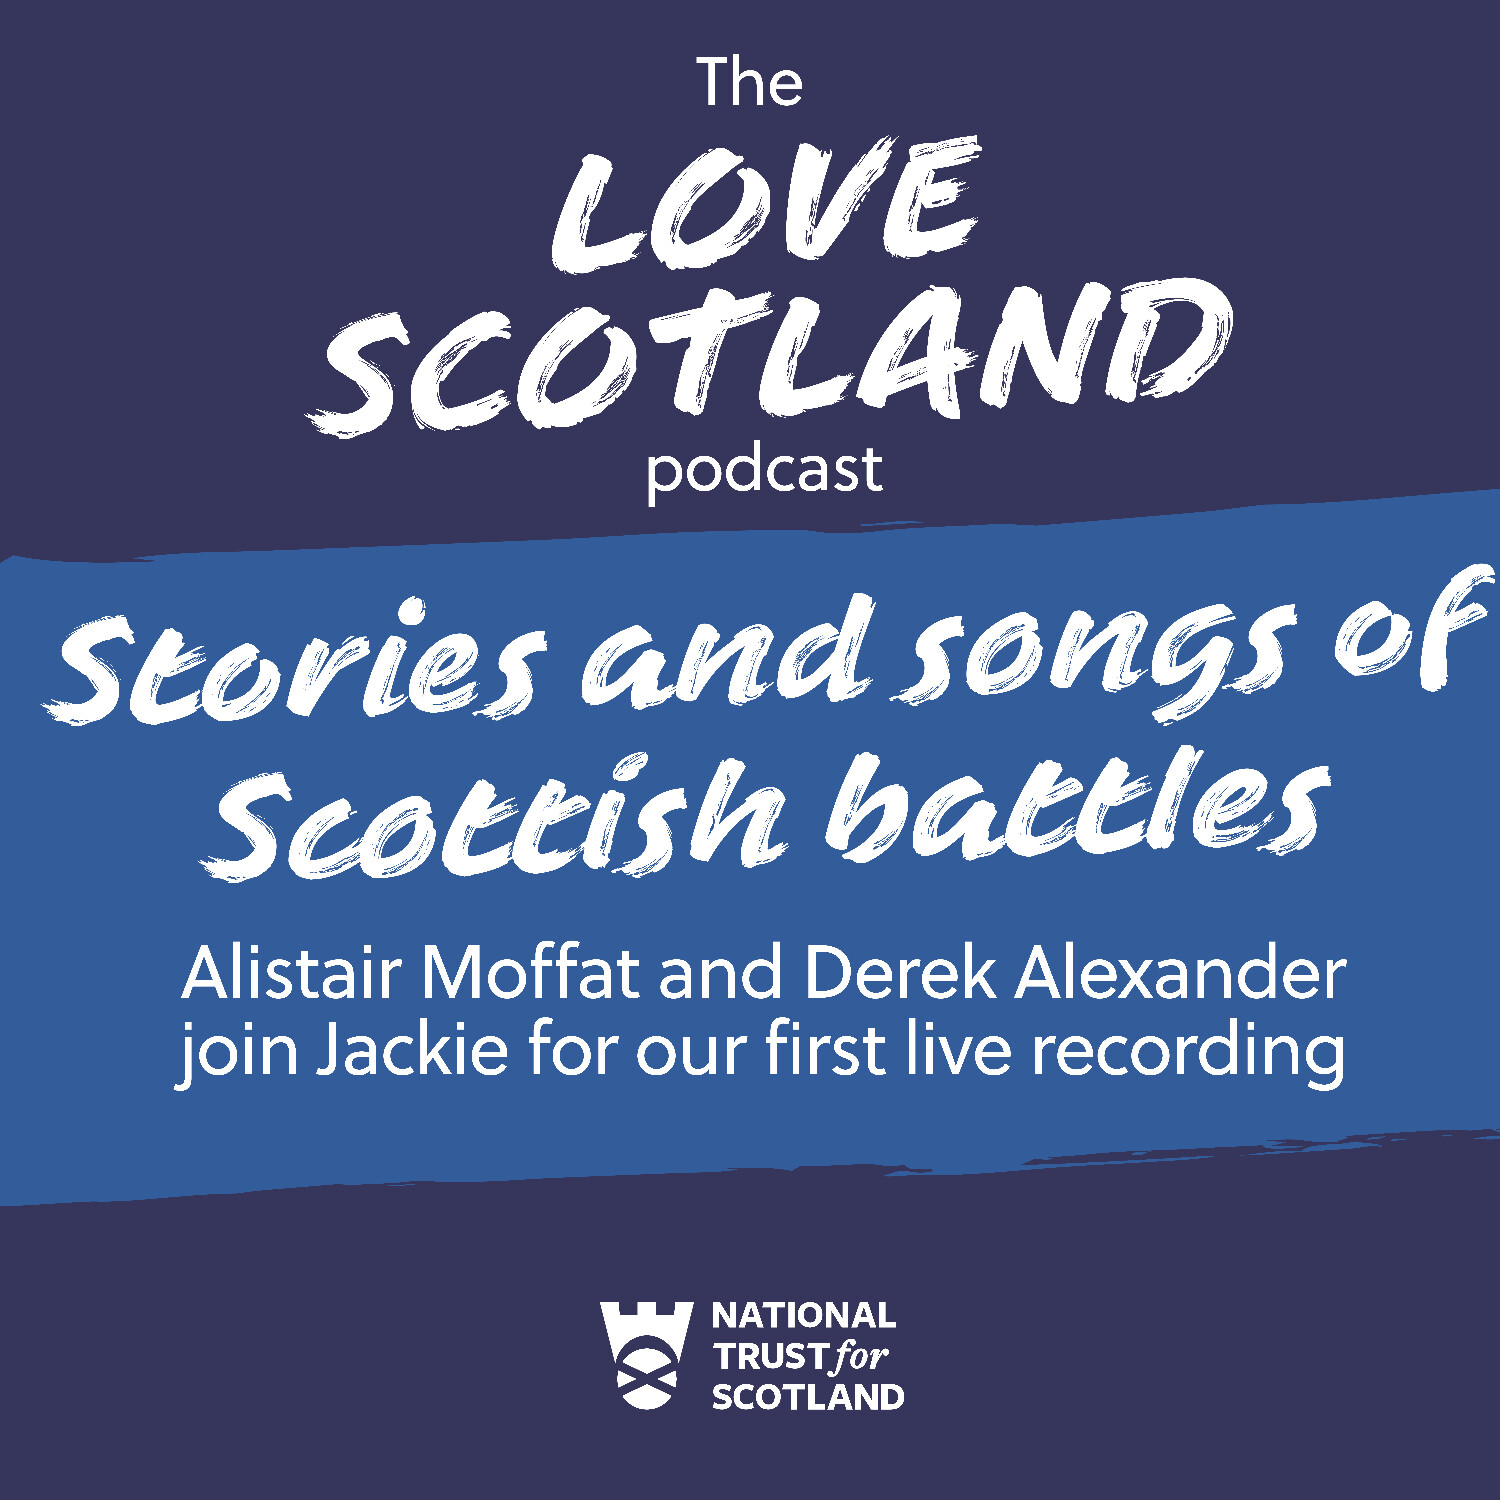 Stories and songs of Scottish battles: A live recording with Alistair Moffat, Derek Alexander and singer Iona Fyfe